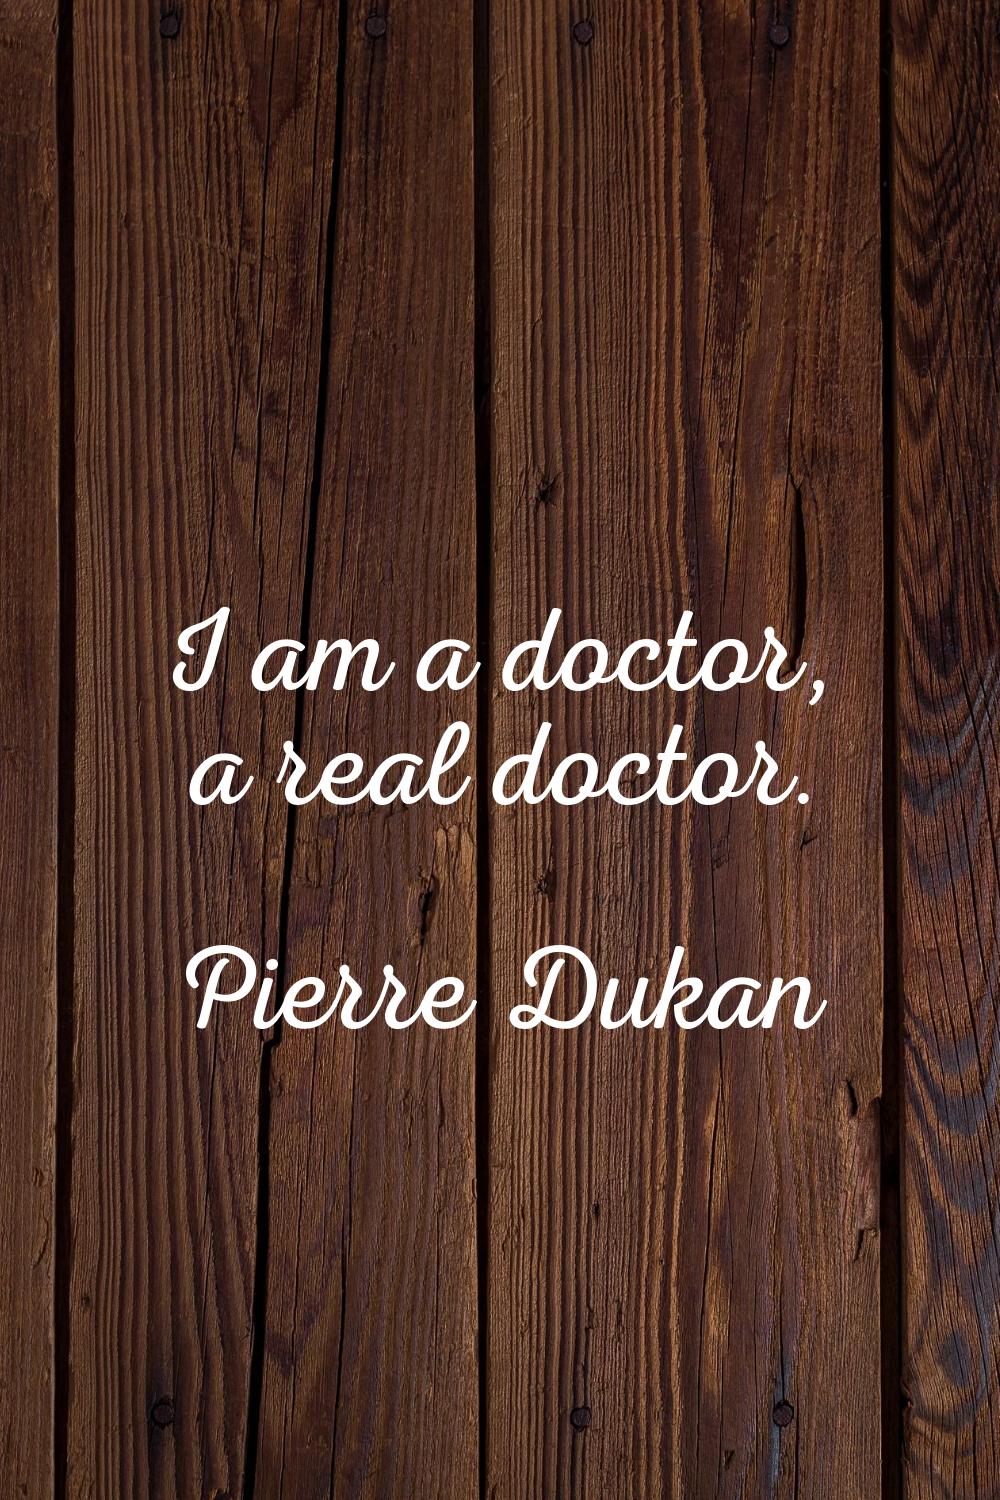 I am a doctor, a real doctor.